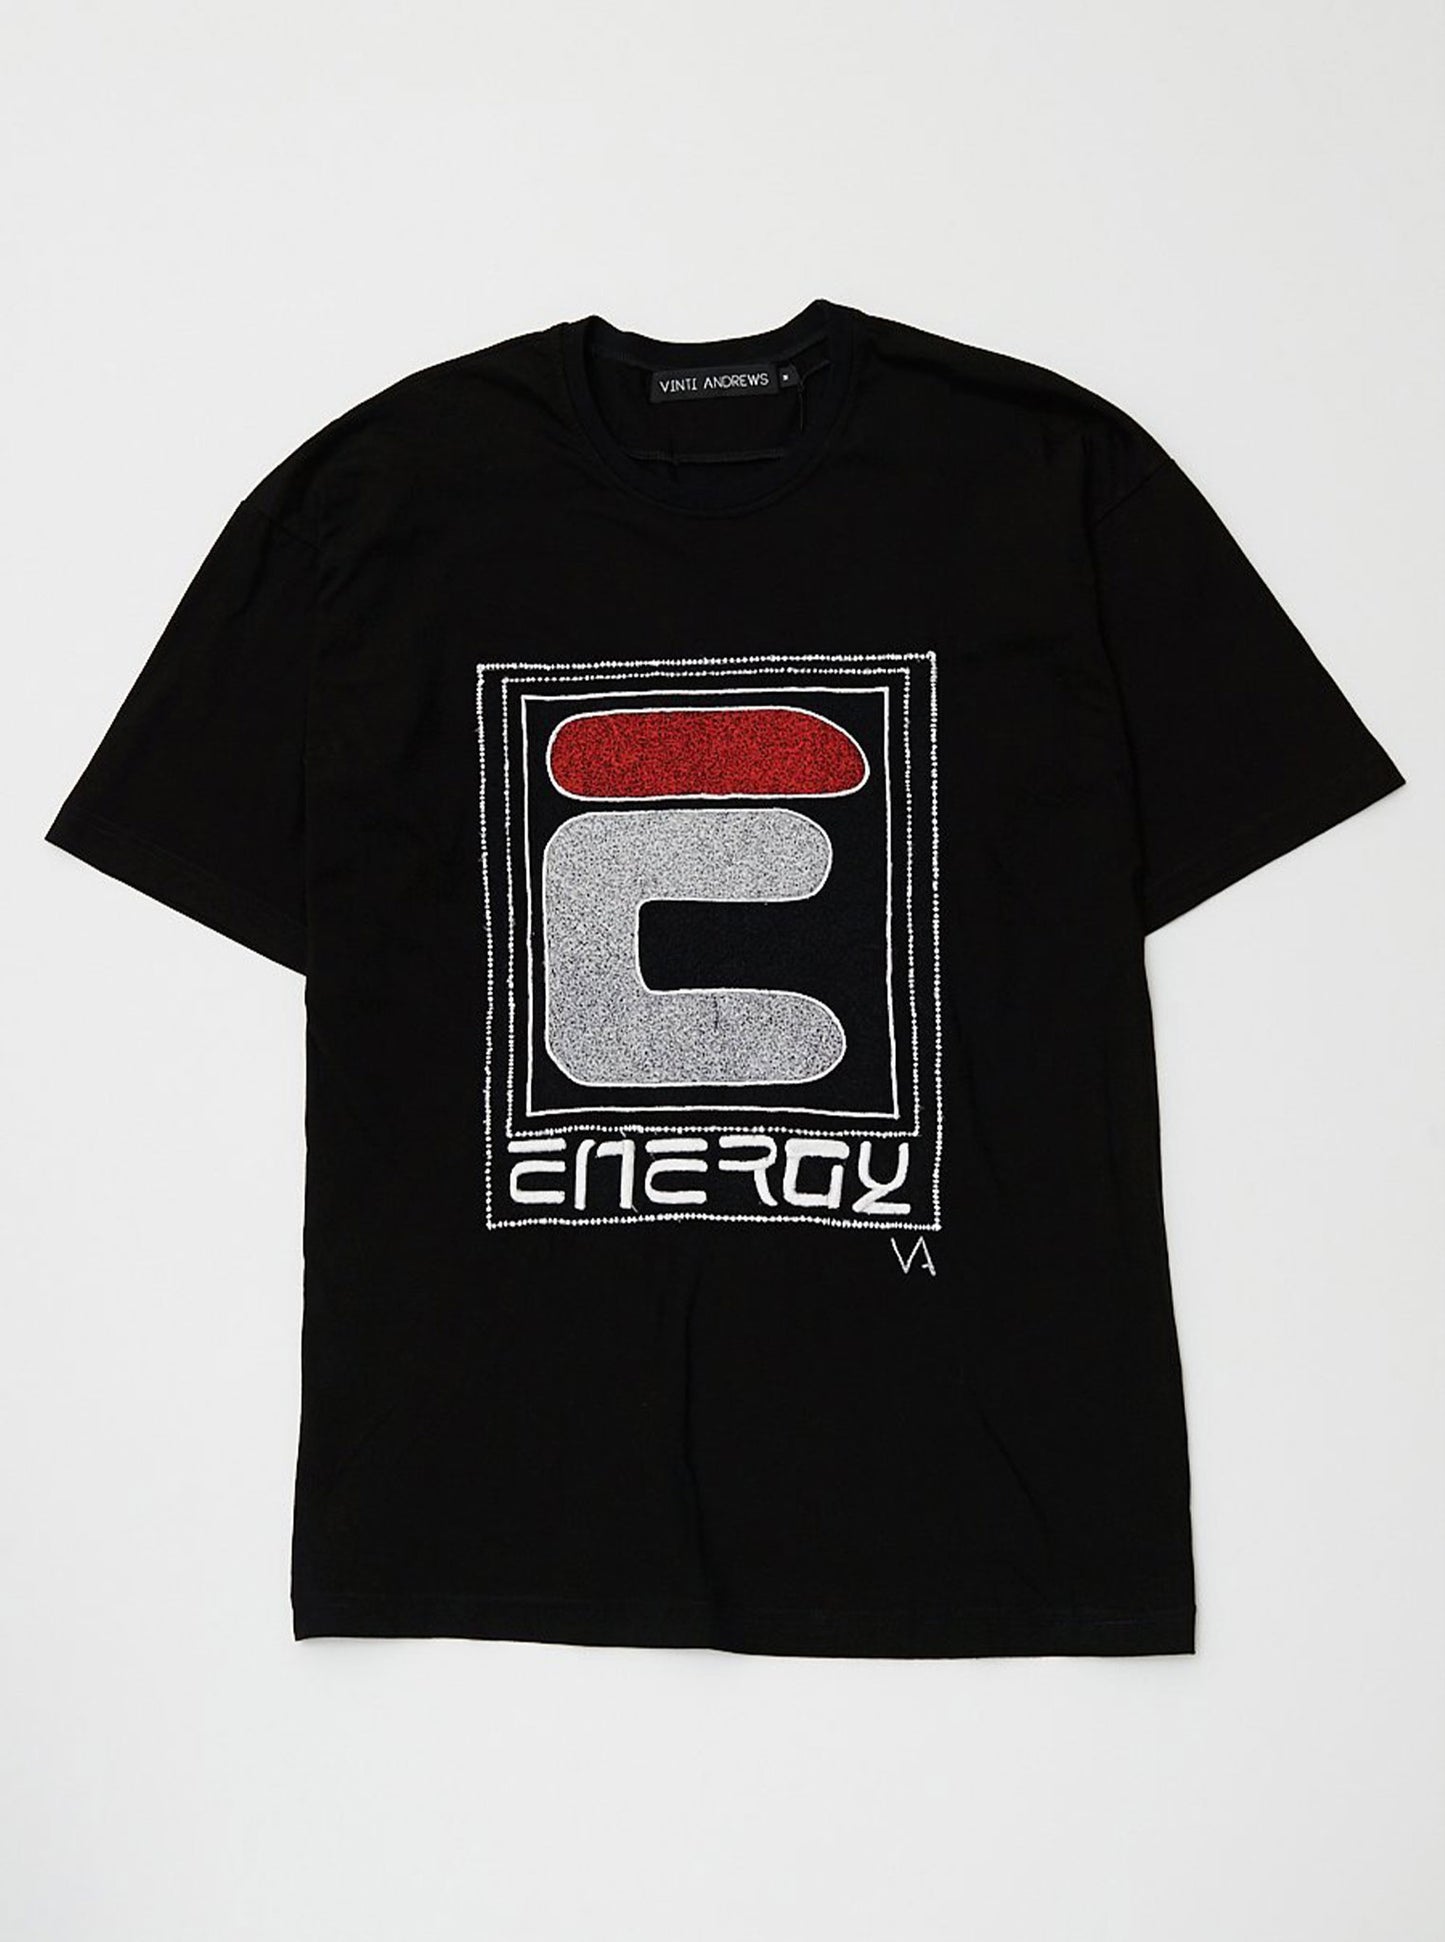 Vinti Andrews Embroidery Energy Oversize T-Shirt